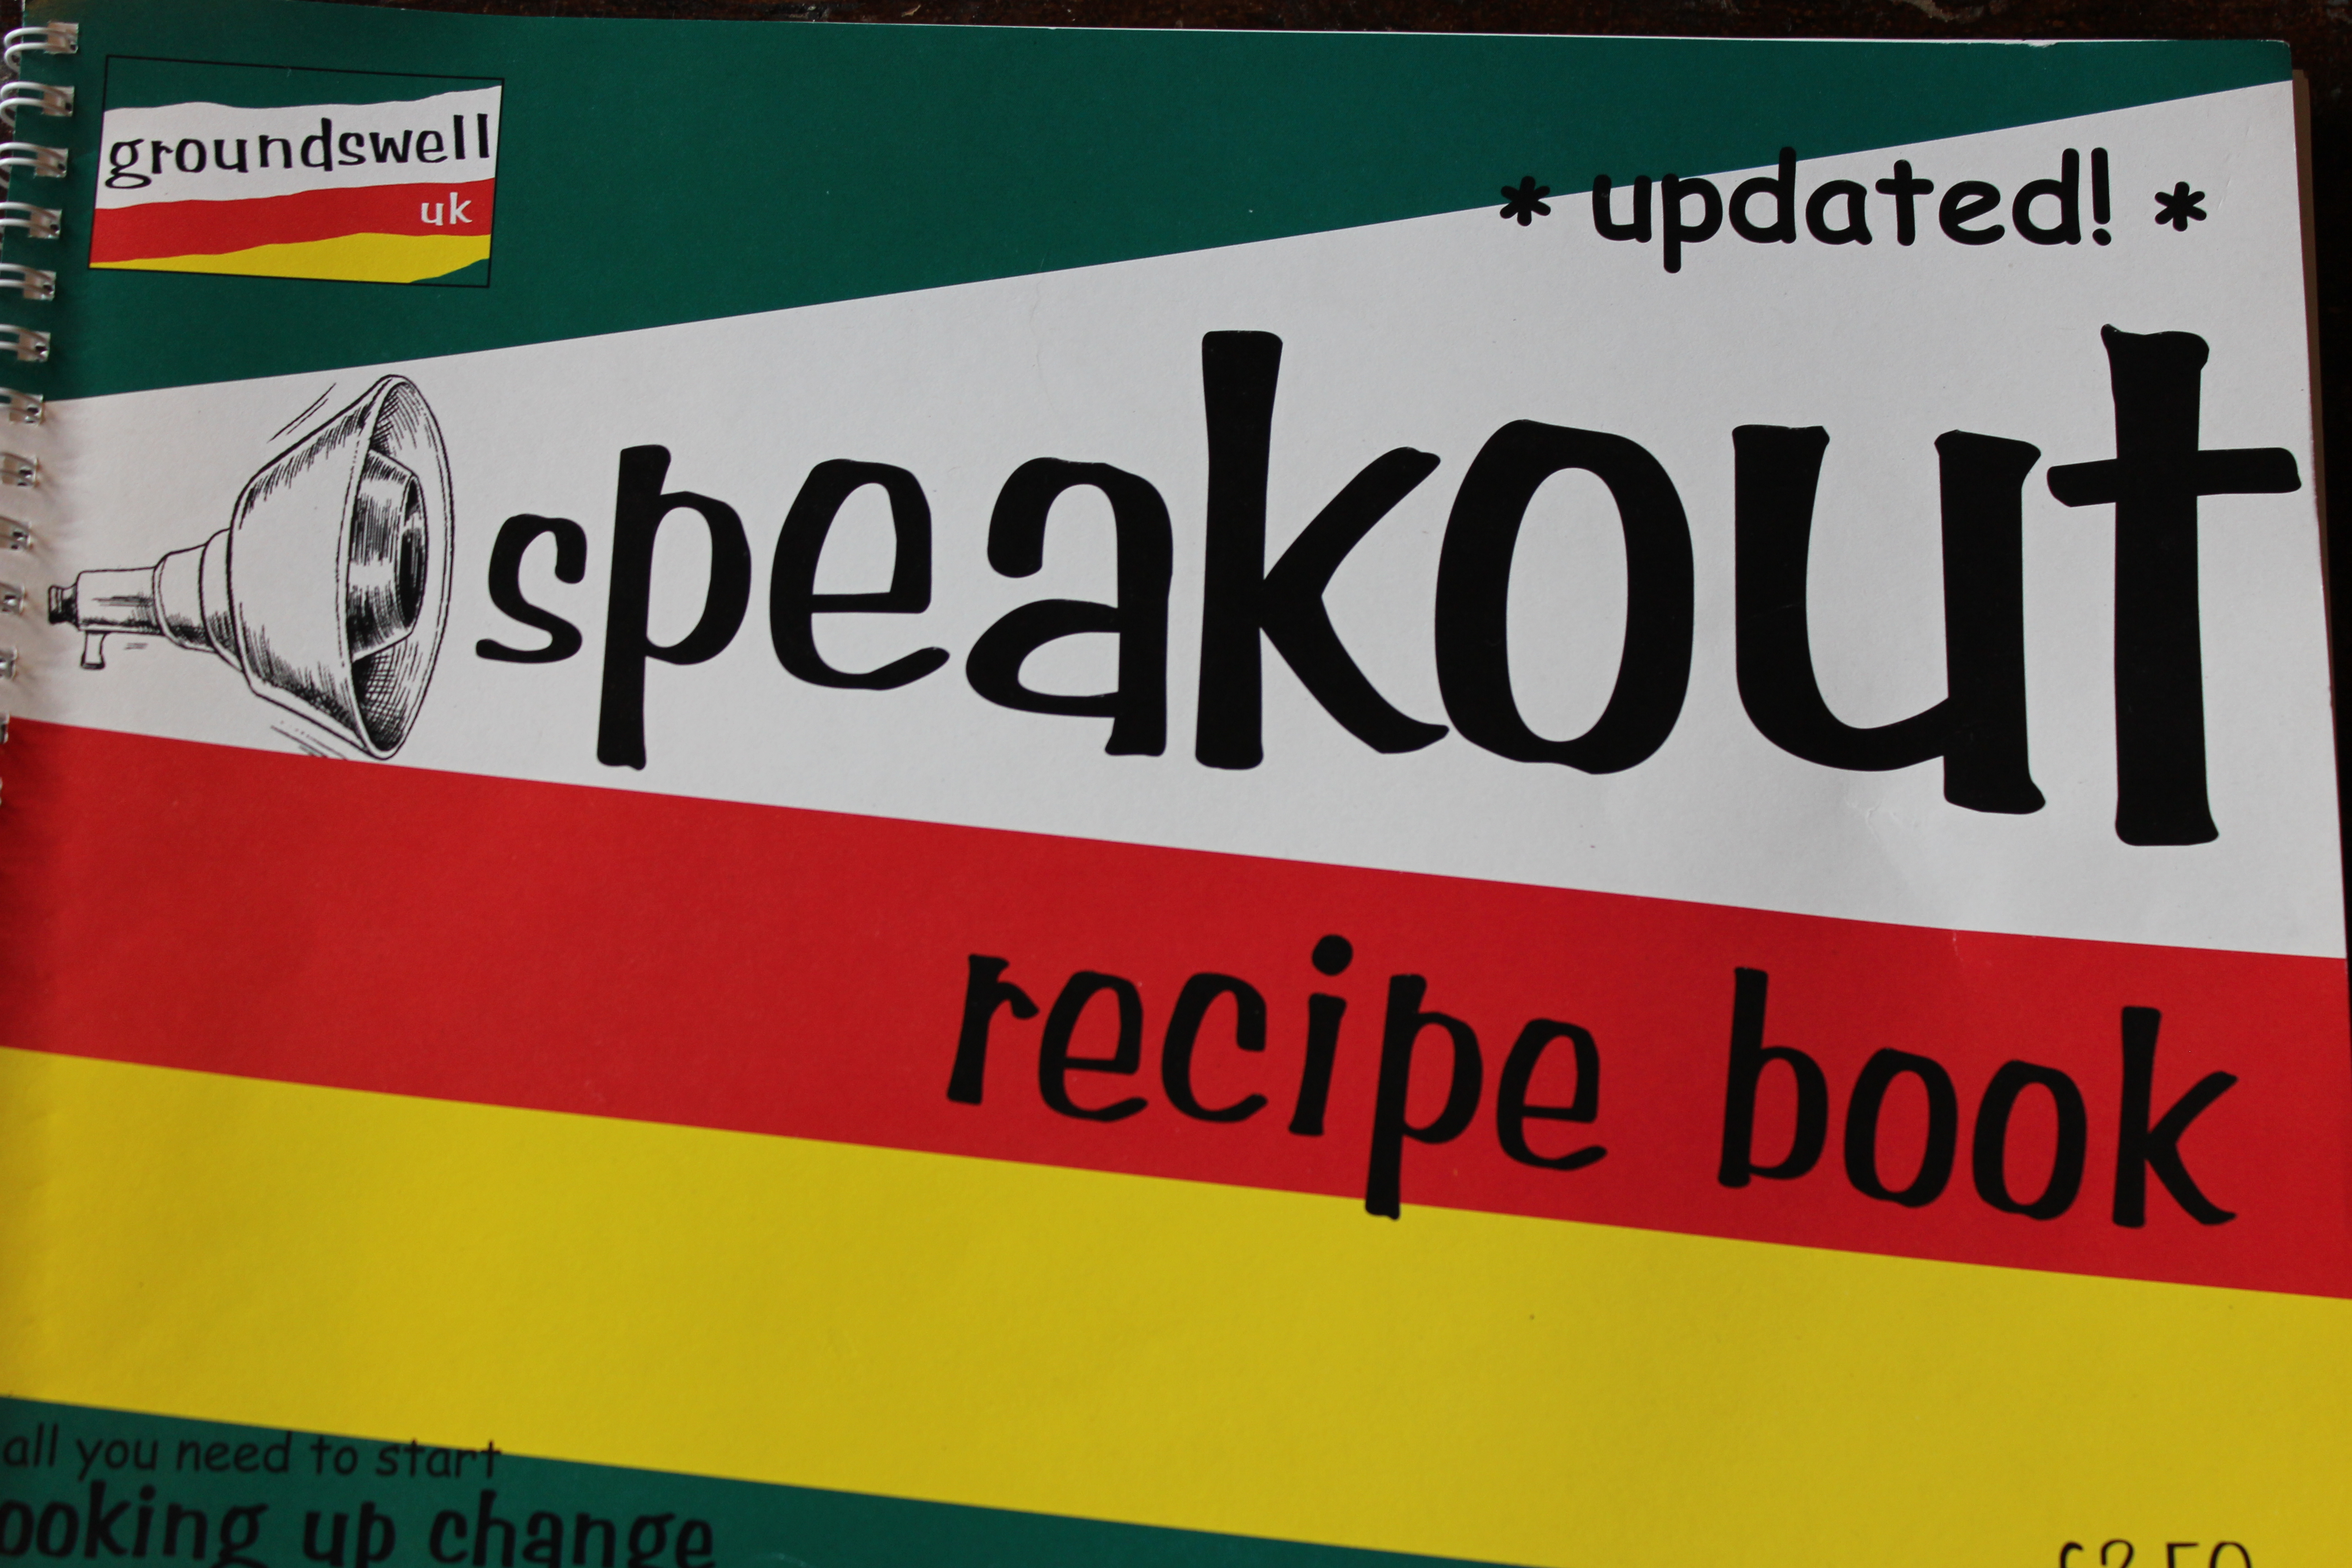 The front cover of the speakout recipe book